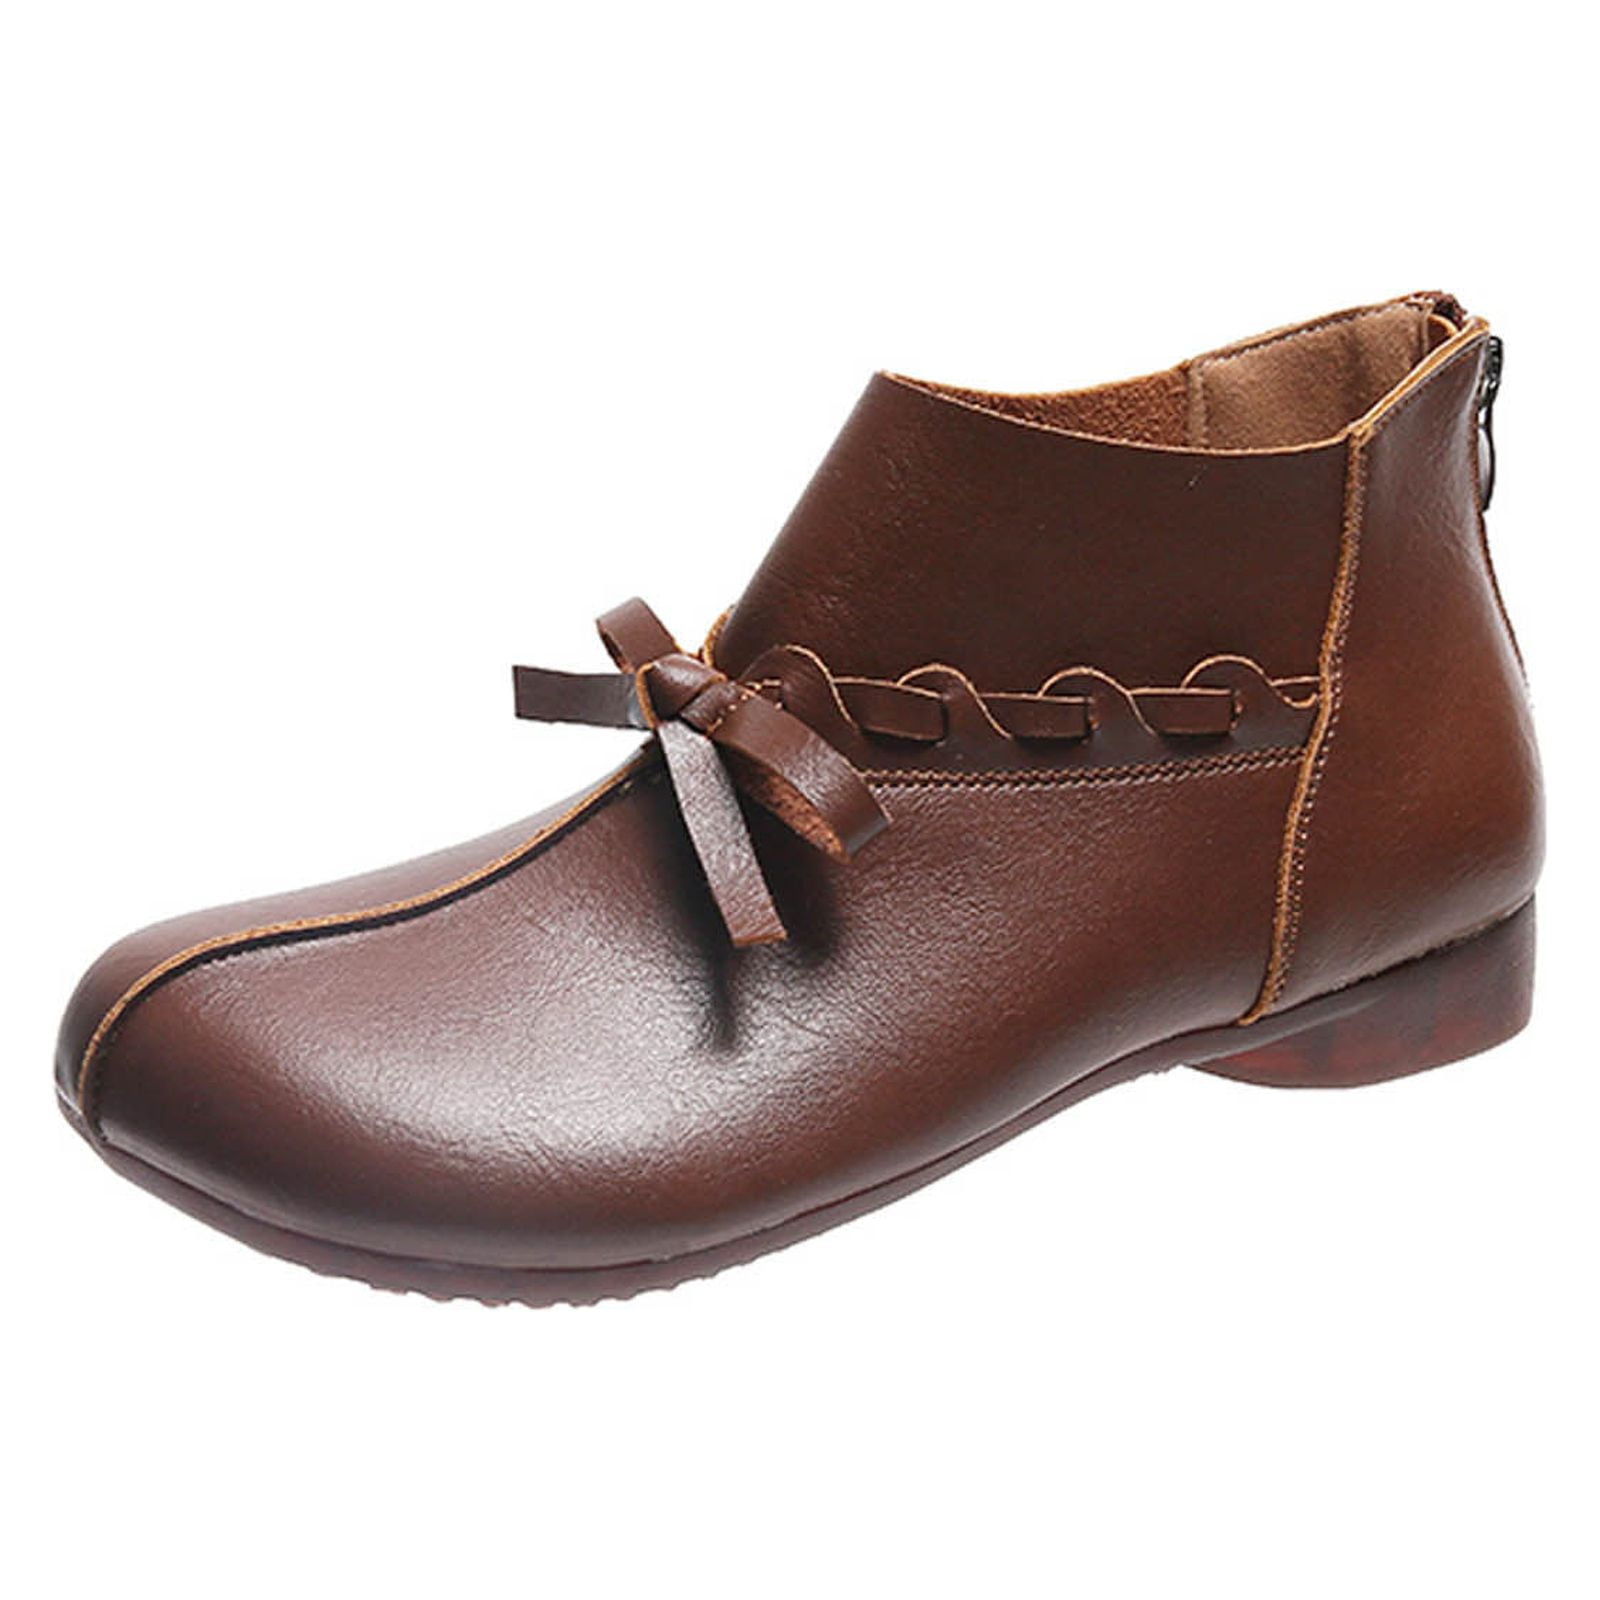 Ladies Brown Ankle Boots | Brown Ankle Boots For Women | Gabor Shoes